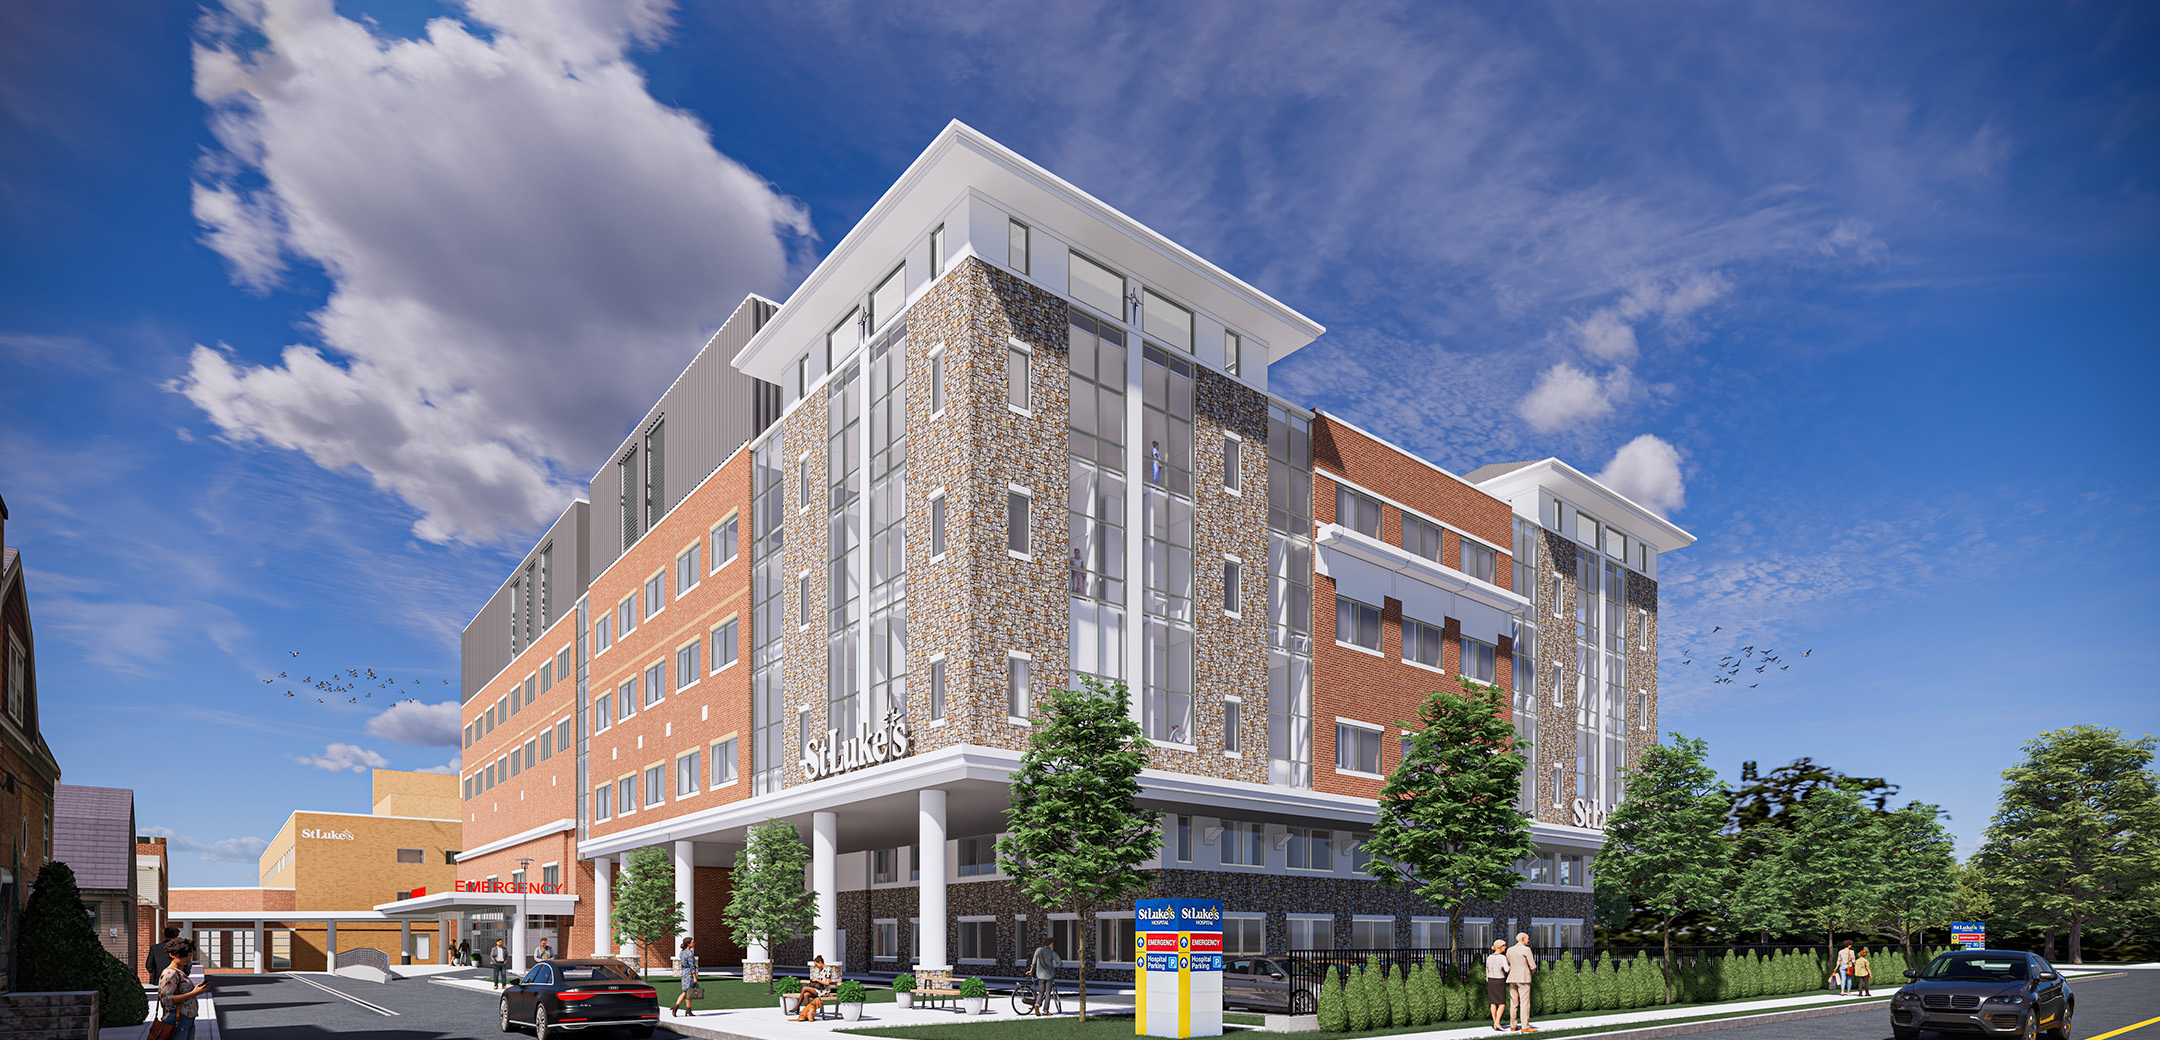 A rendering of St. Luke's University Health Network Mother's and Baby Tower showcasing the tan and red brick exterior of the facility with windows